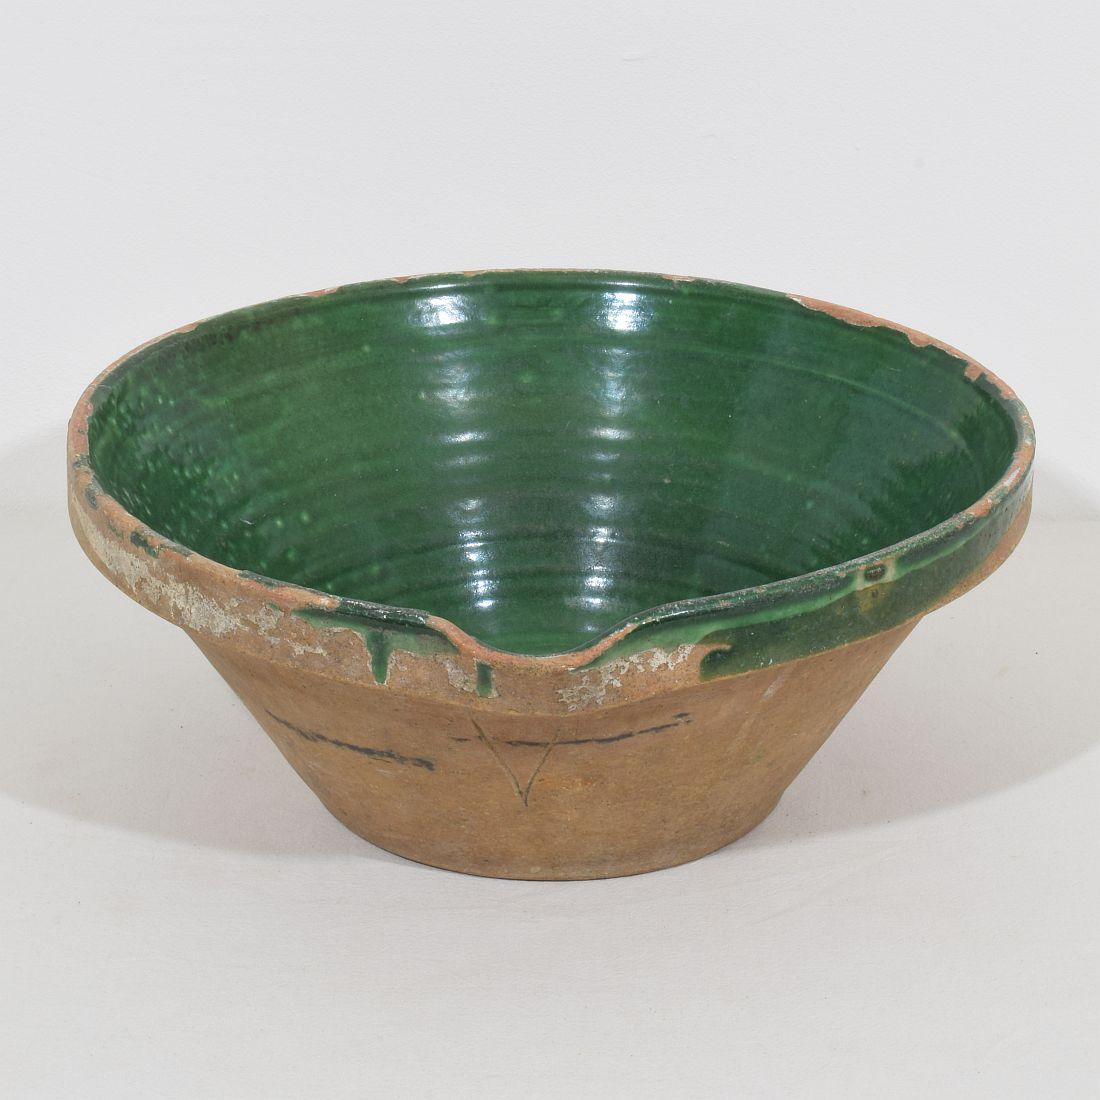 Great piece of pottery from the Provence. Beautiful green color,
France, circa 1850.
Good but weathered condition.